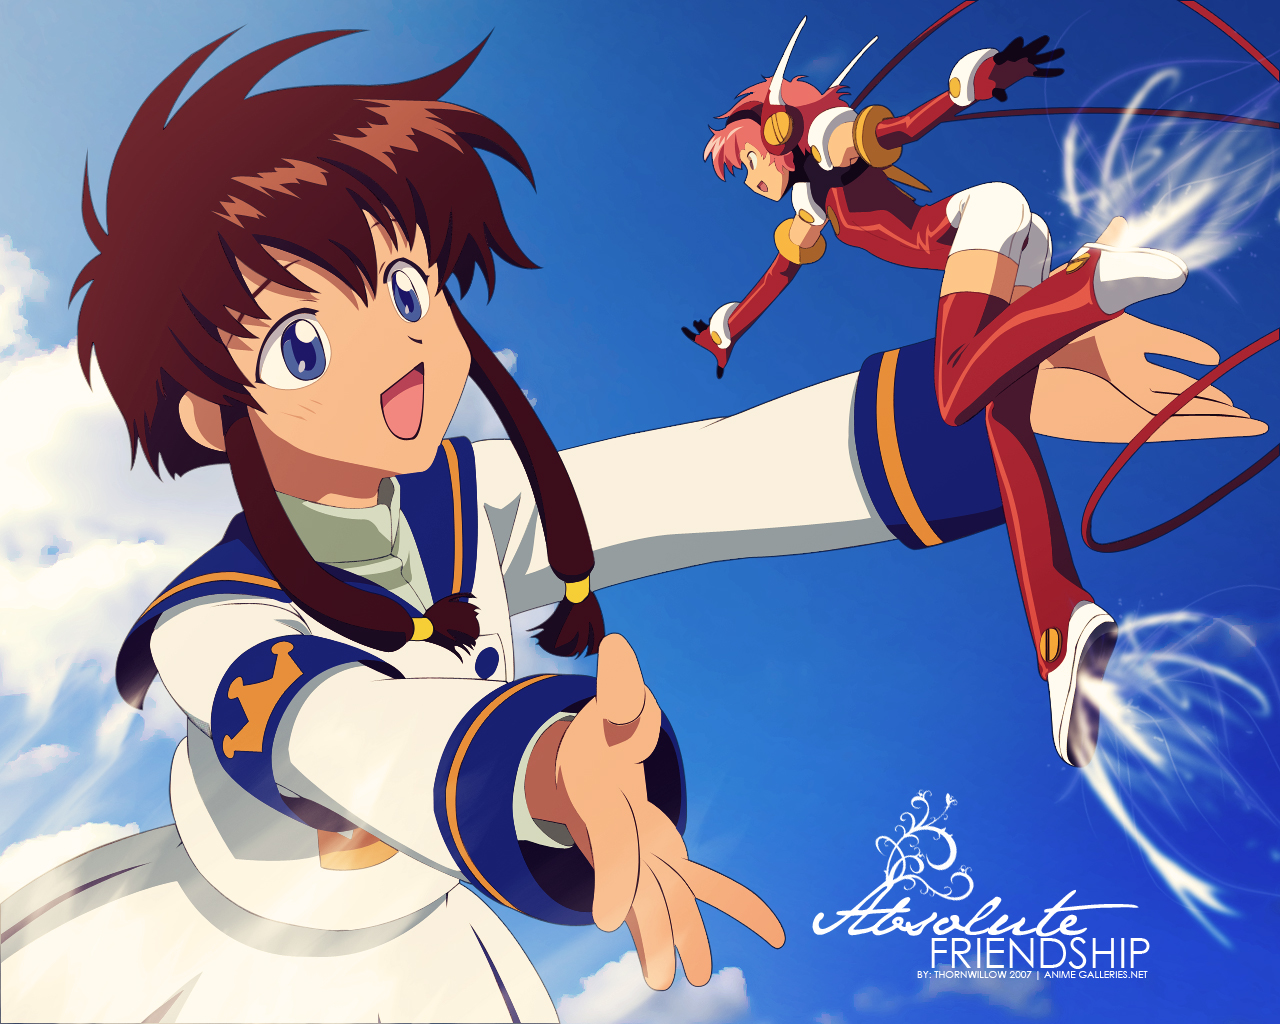 Angelic Layer , HD Wallpaper & Backgrounds